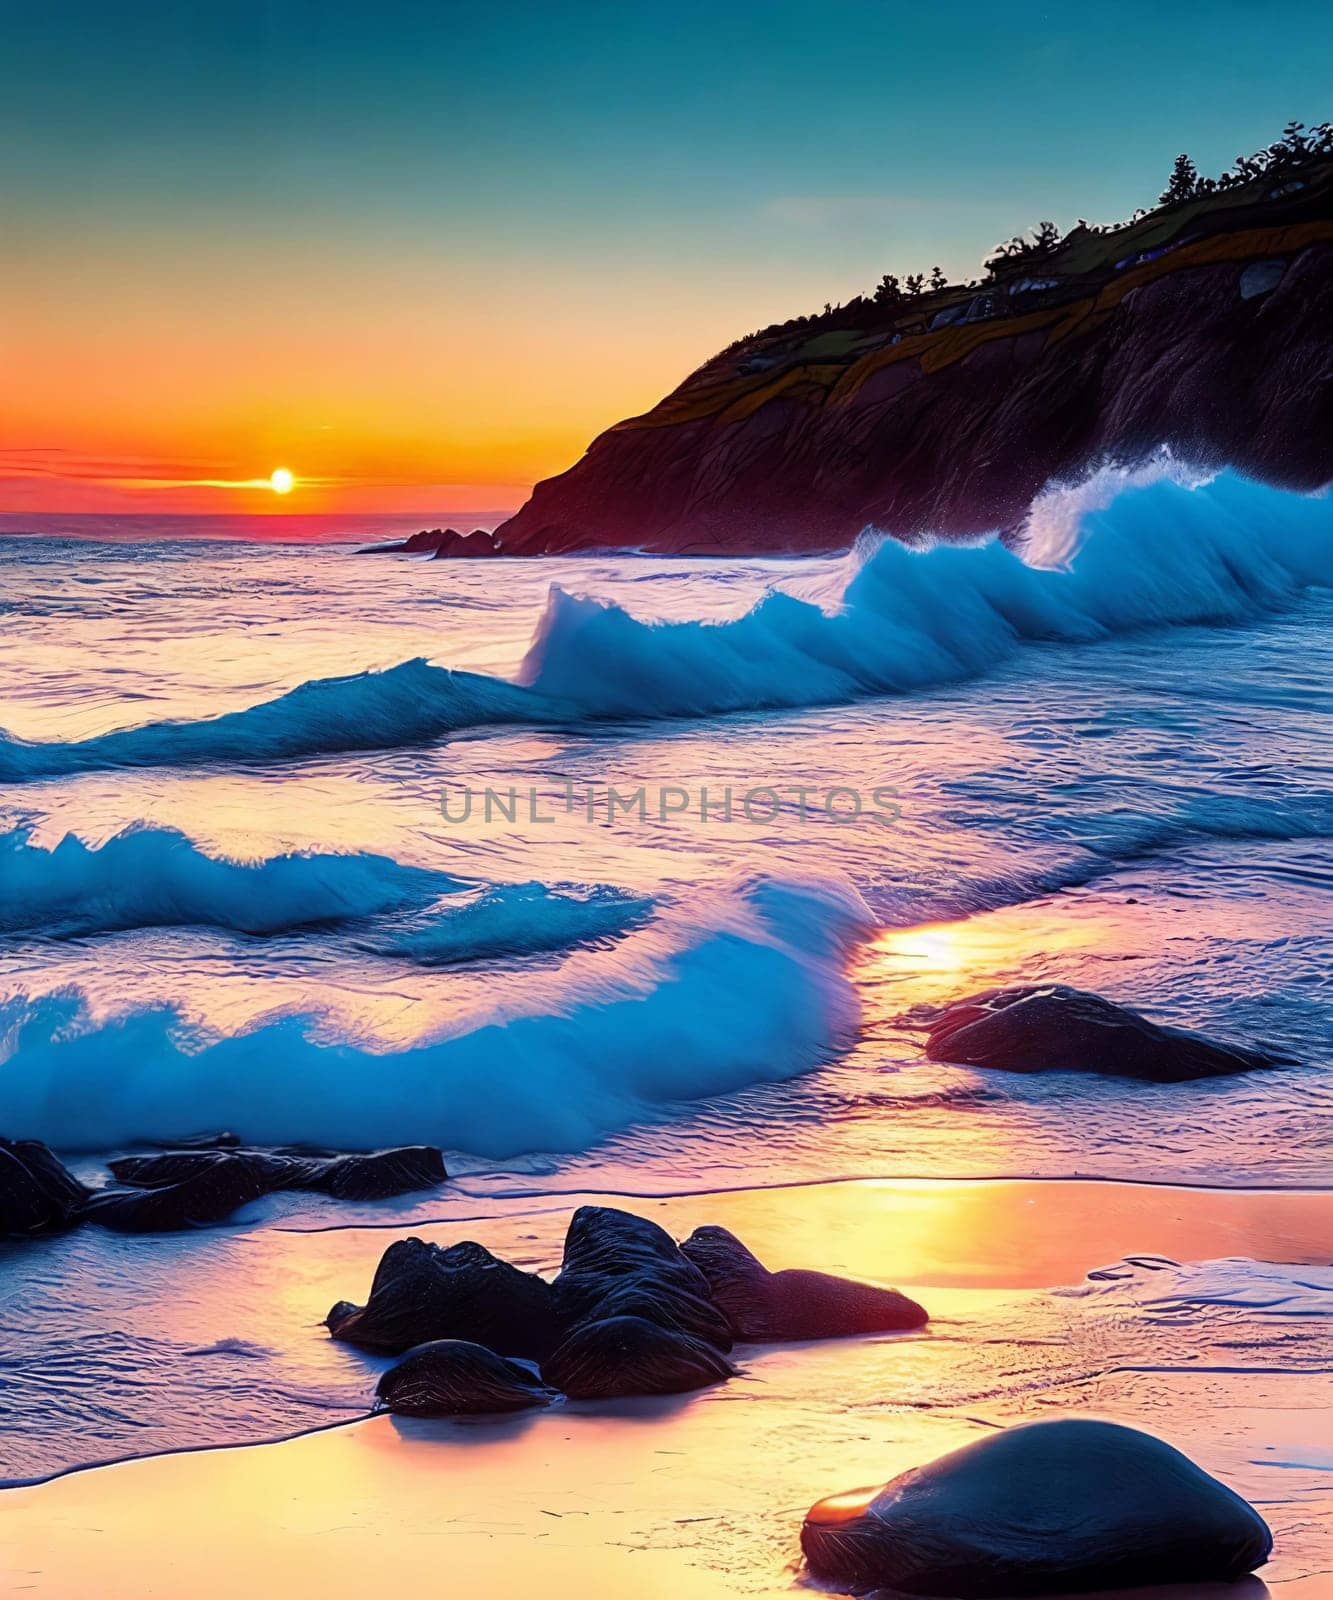 Coastal Charm. Rugged beauty of a coastline at sunset, capturing the intricate patterns of rocks and shells washed by the gentle waves under the warm, golden light.